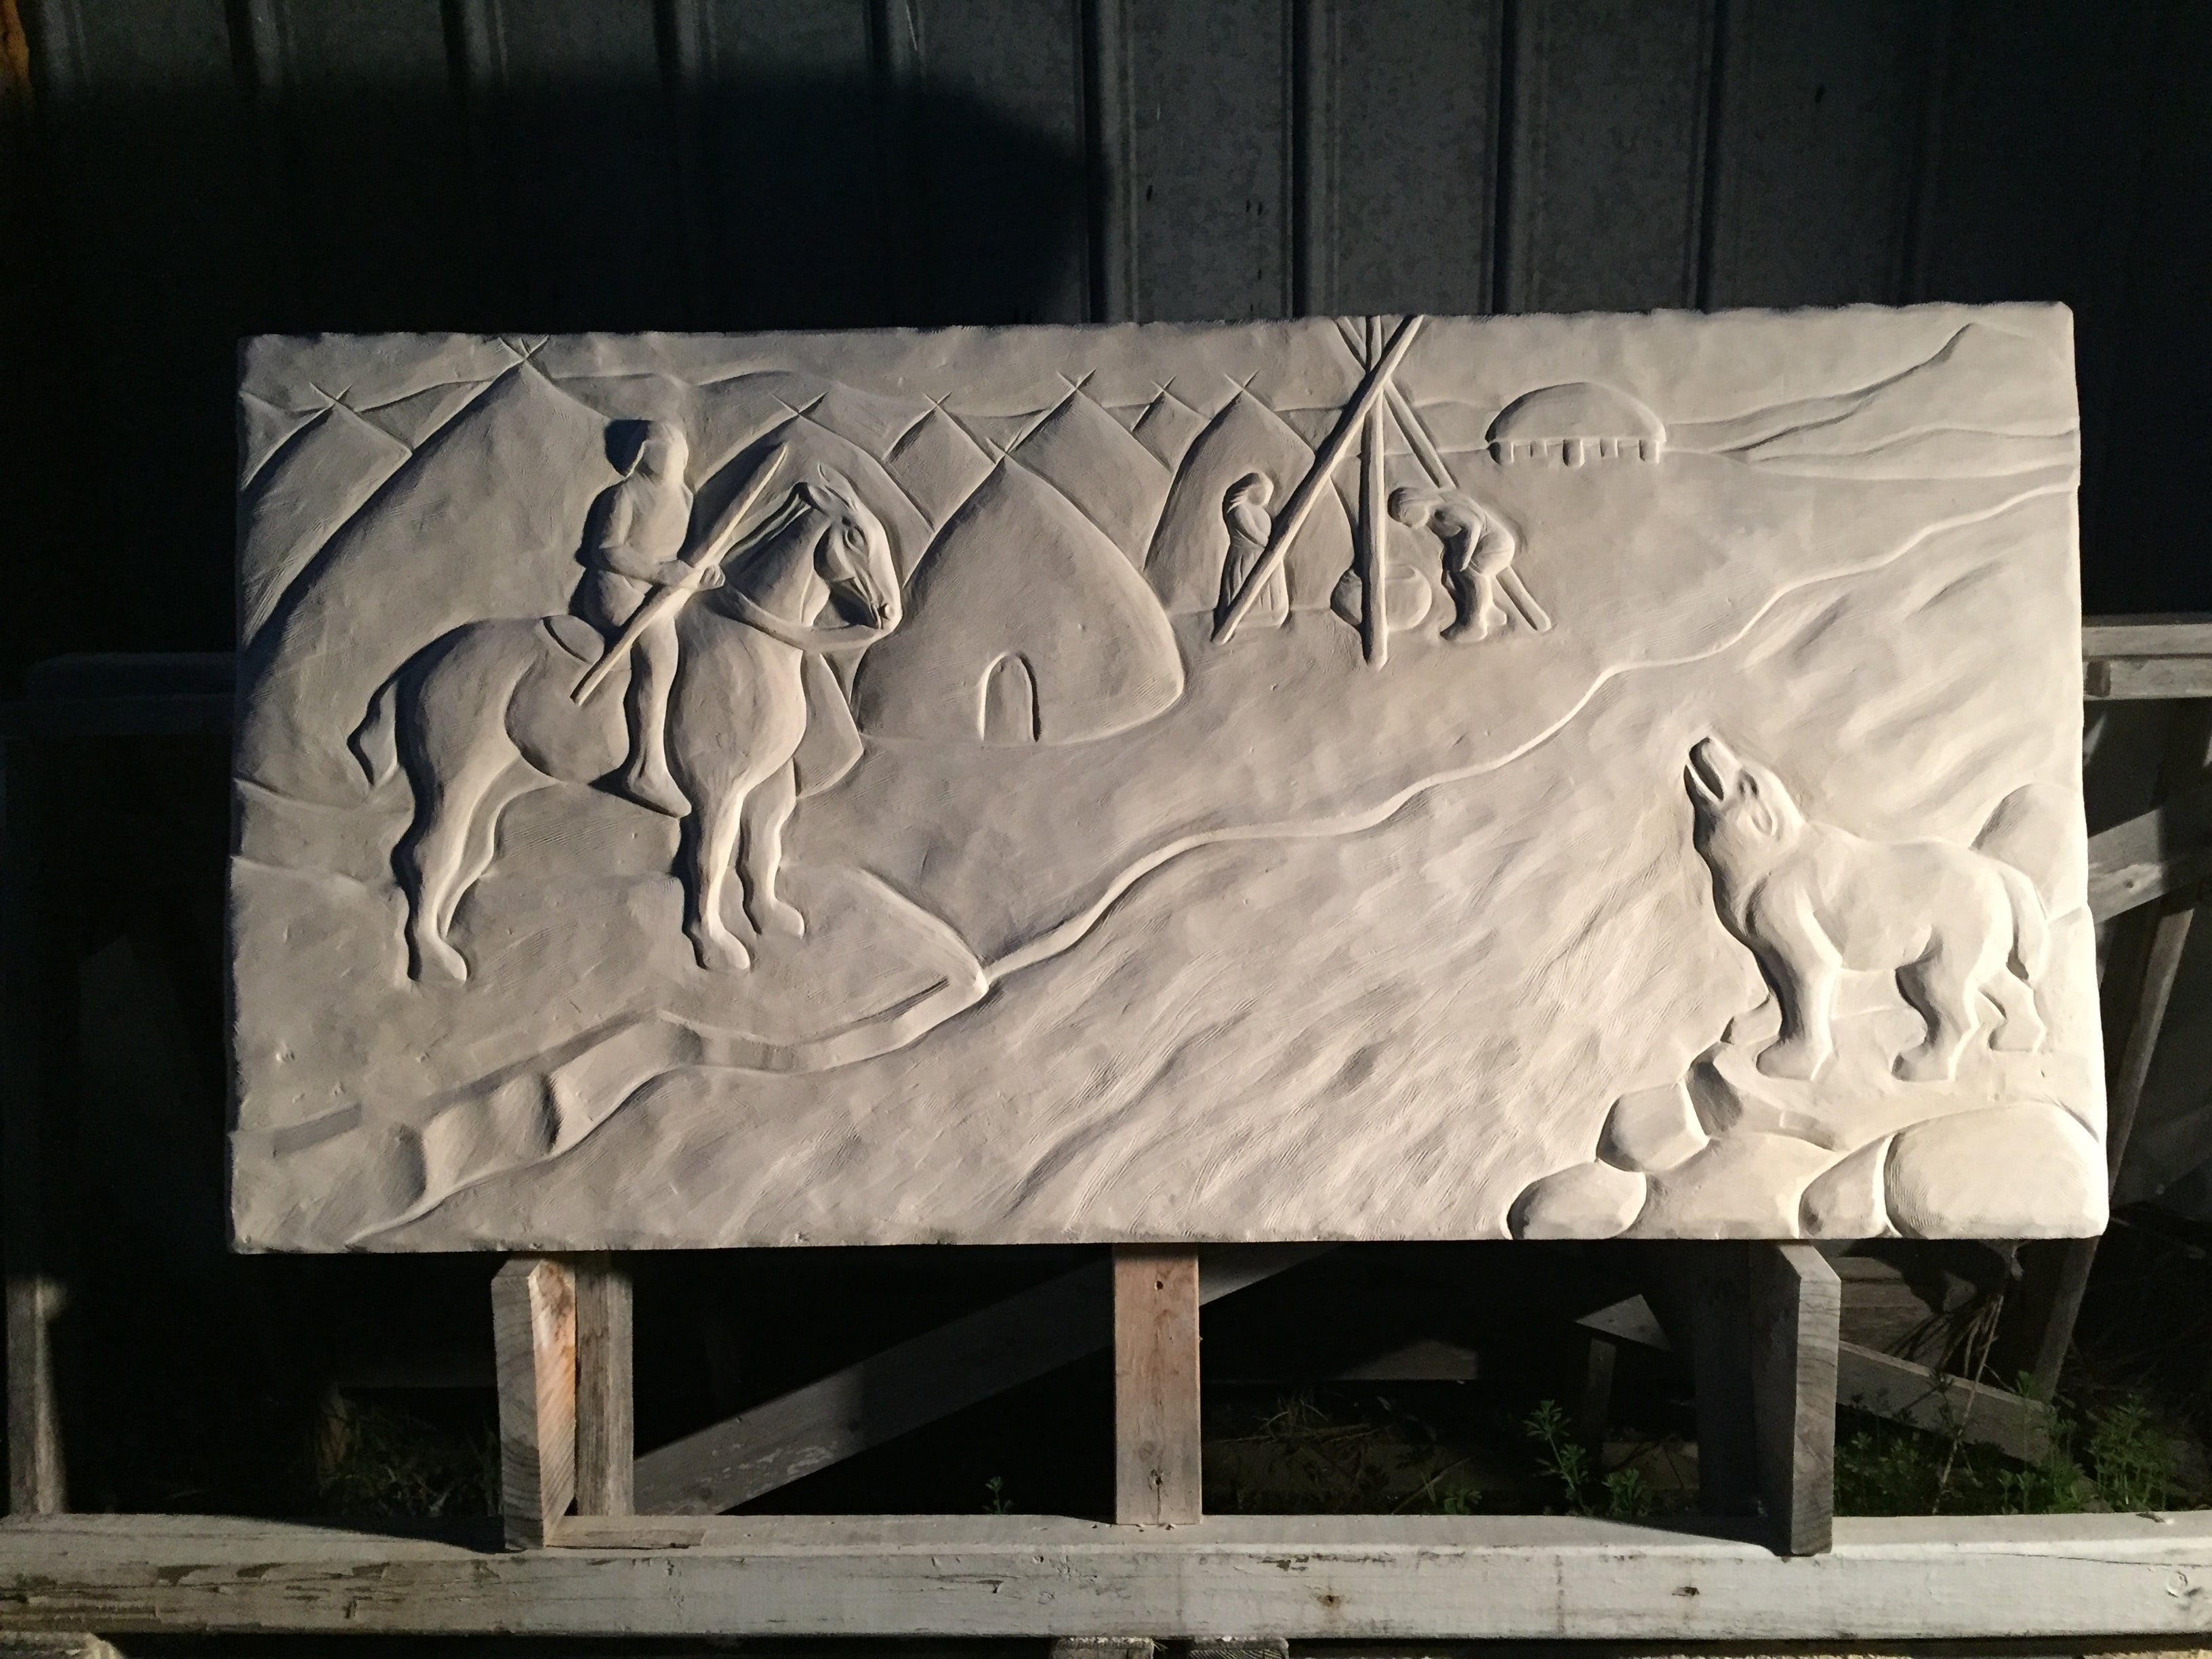 Long Cove Relief with images of Native Americans overlooking a river and a wolf on the other side carved in limestone